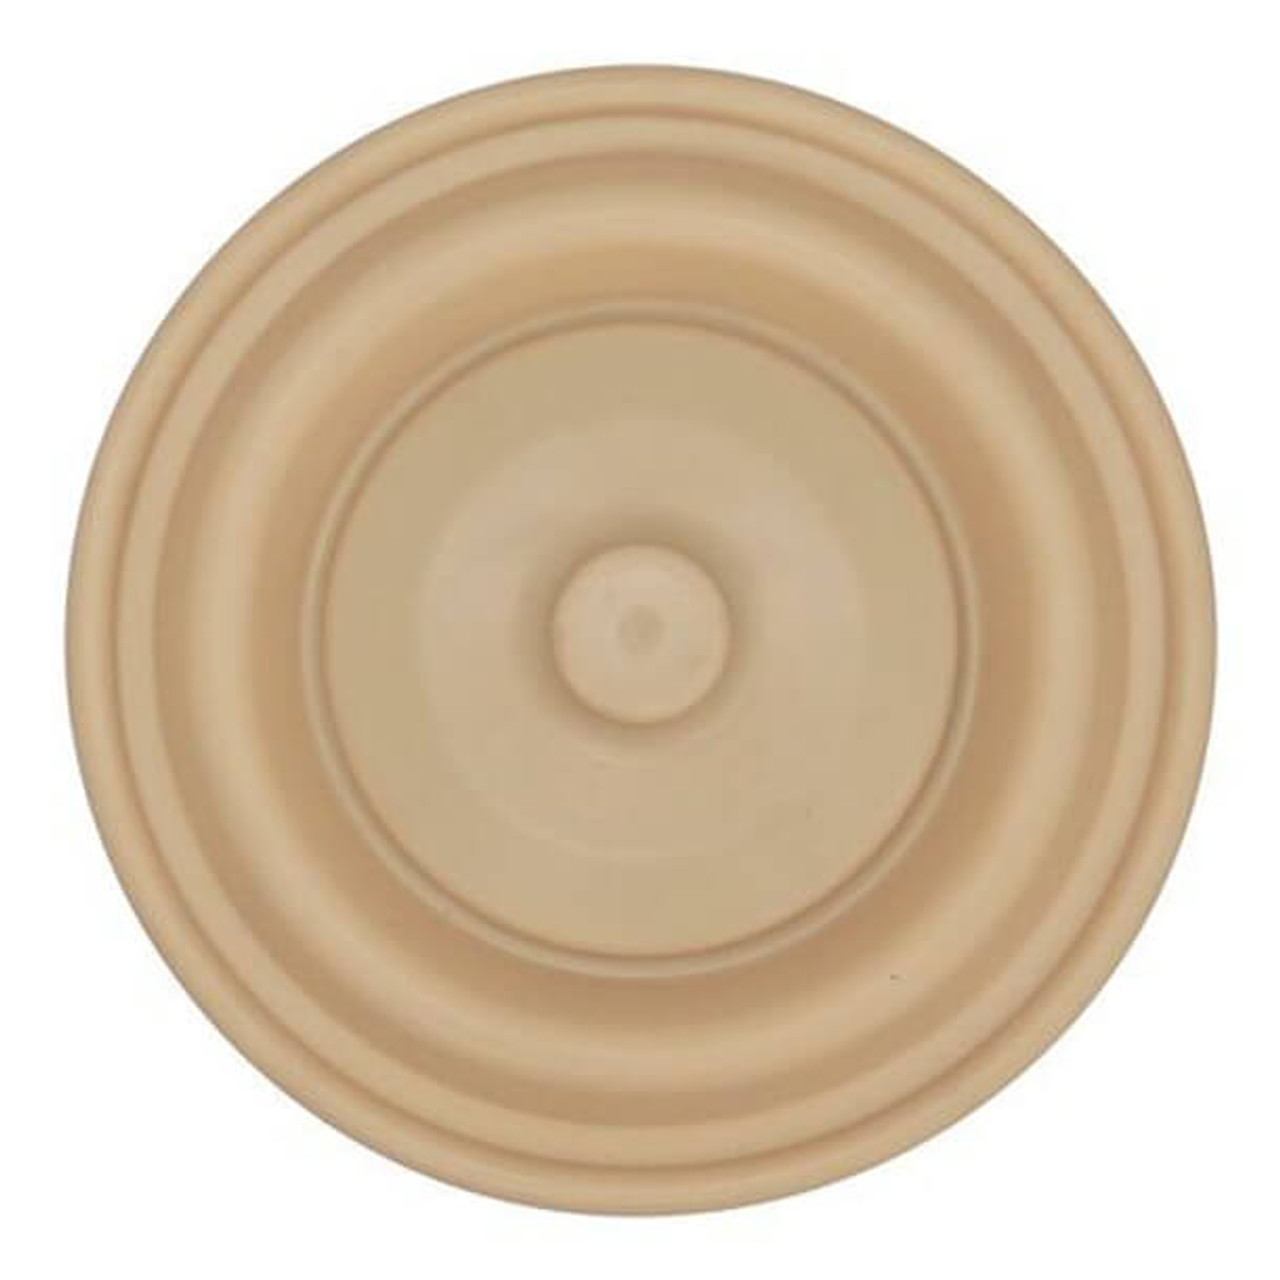 04-1031-58 IPD Diaphragm for 1.5" Pump